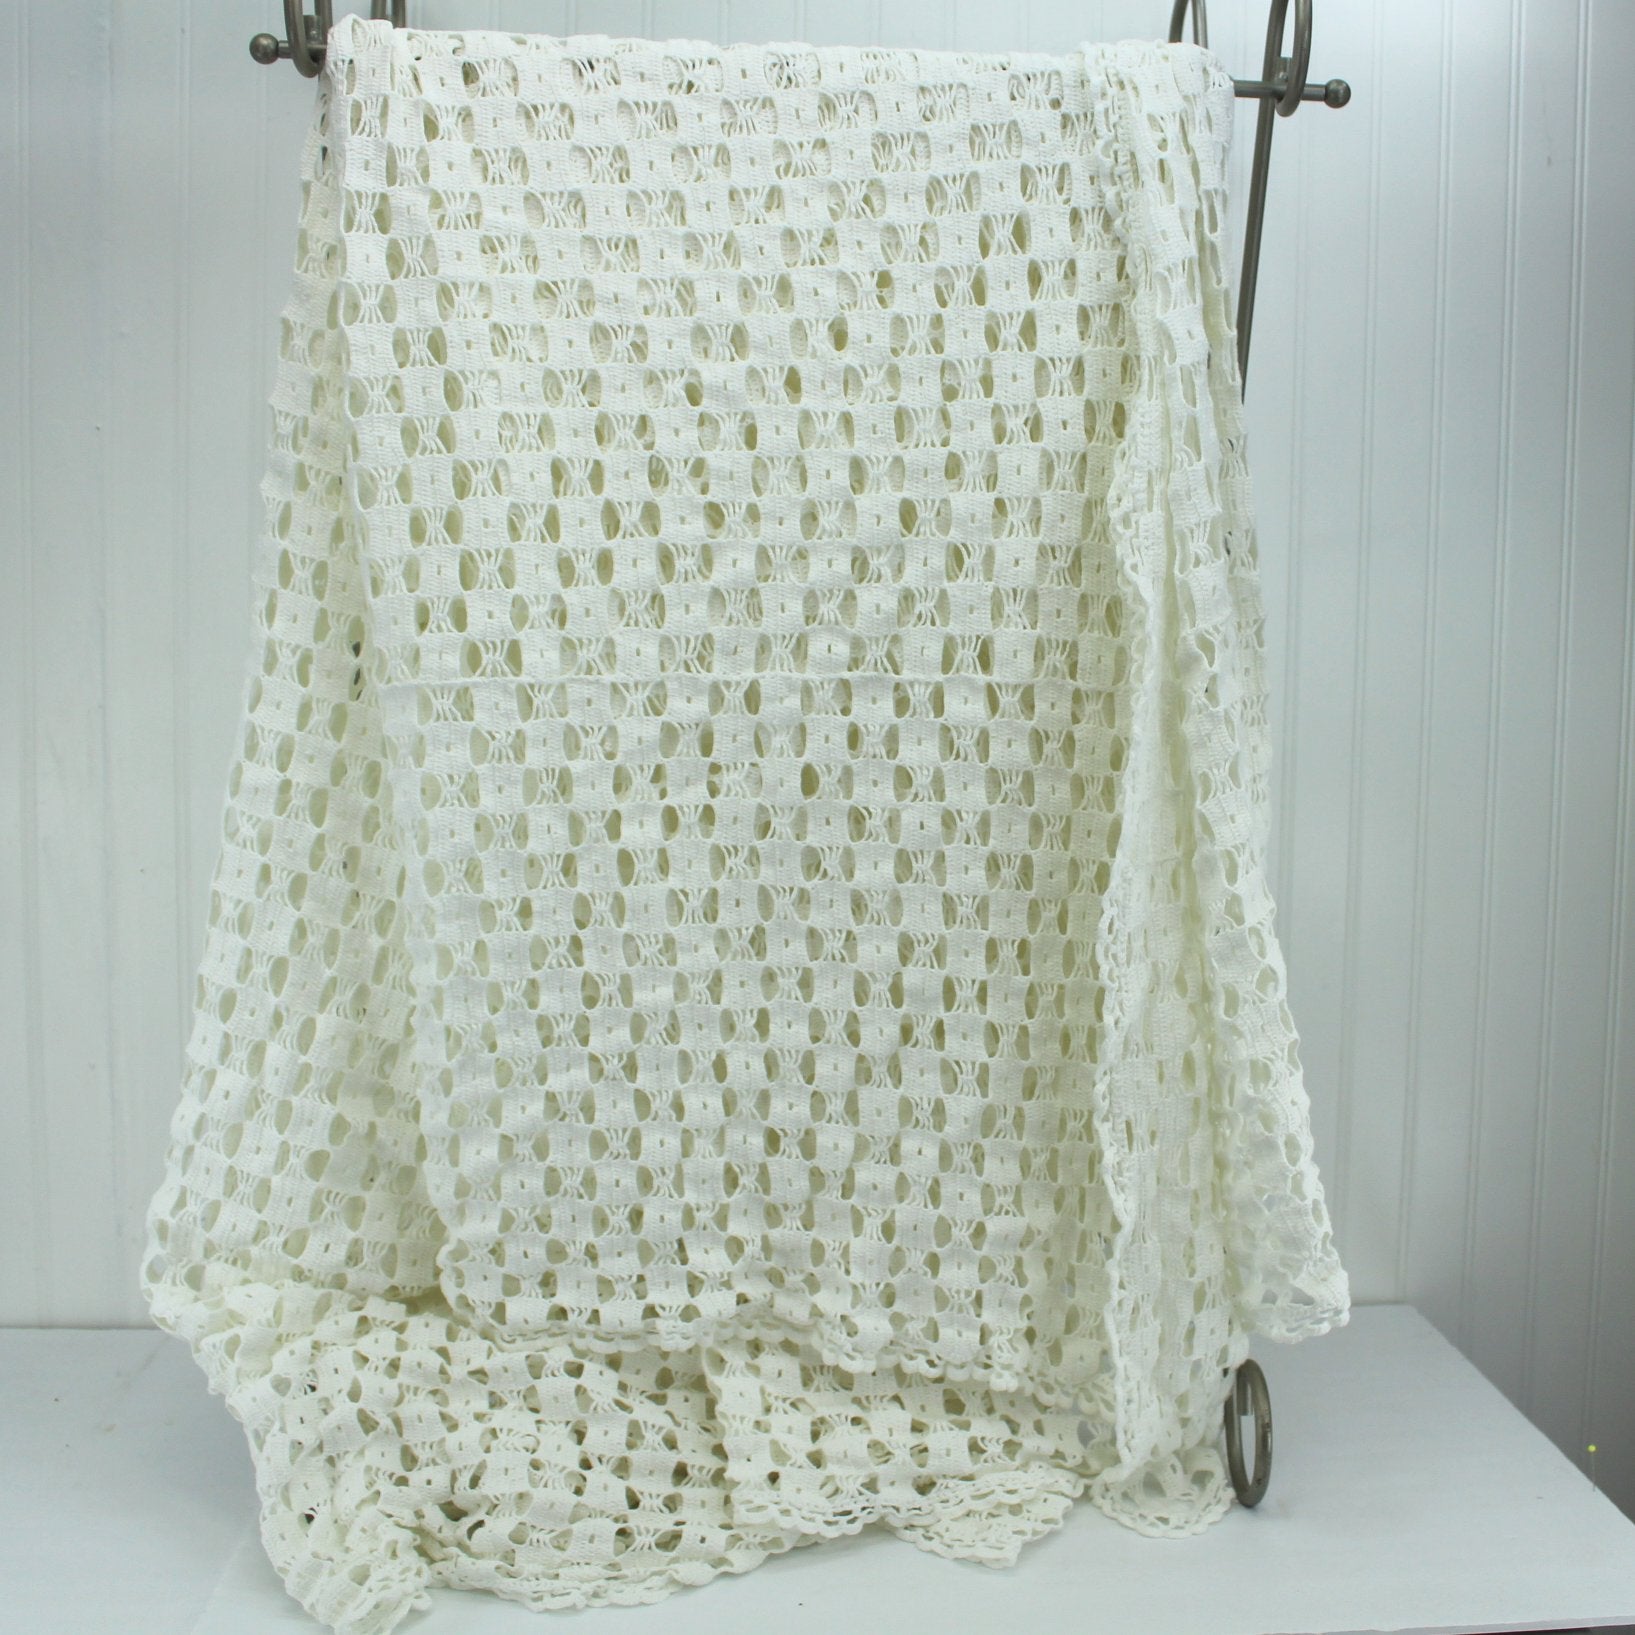 Crochet White Table Cloth Hand Made 75" X 90"